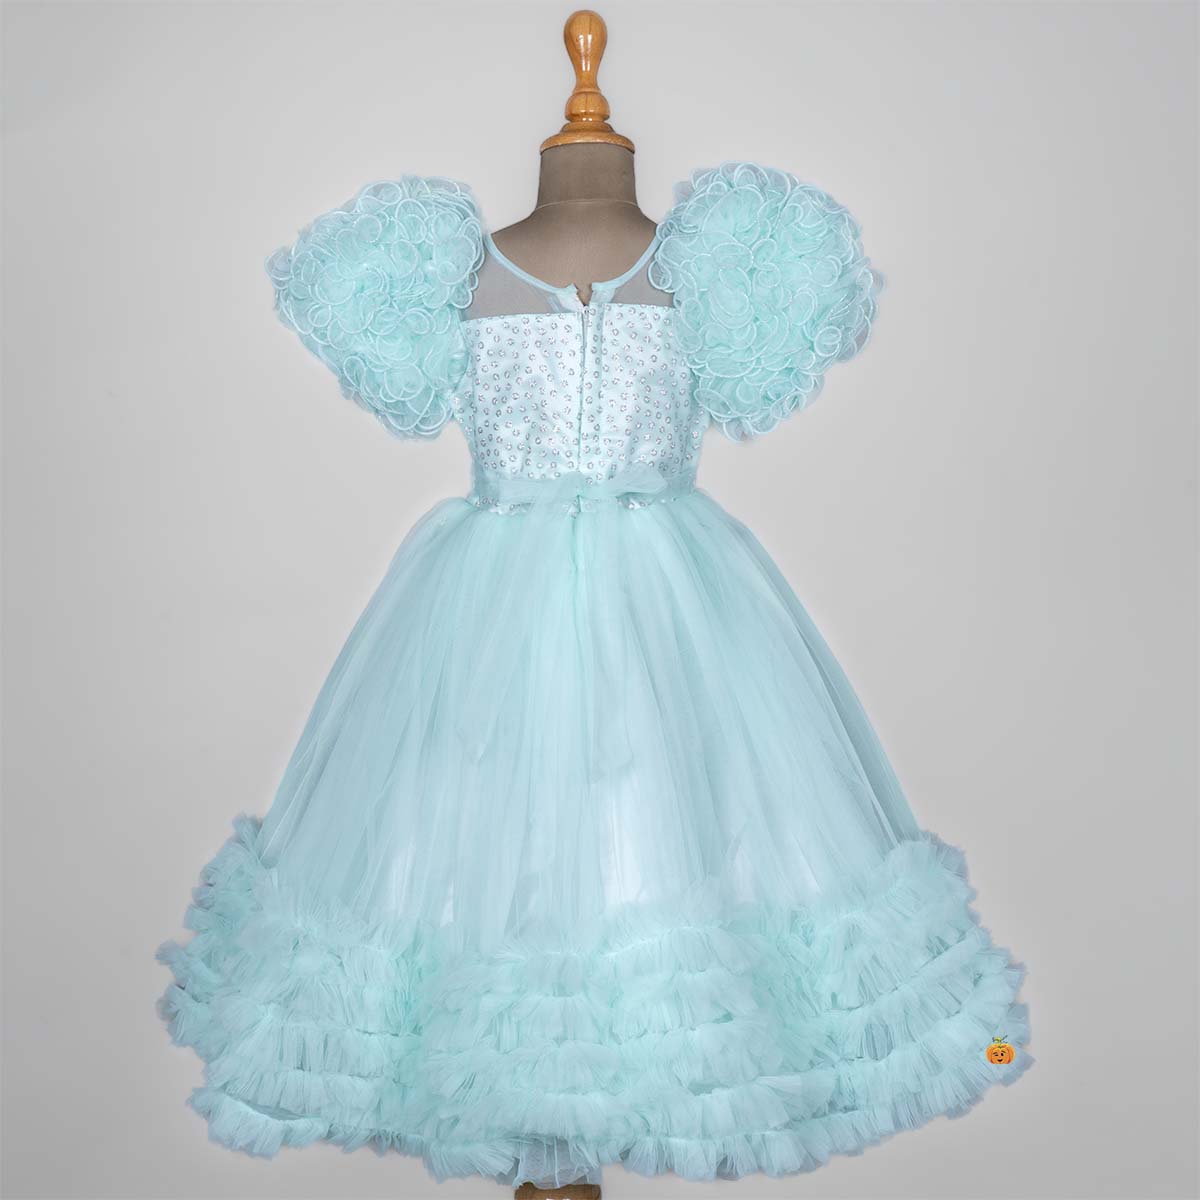 Sequin Girls Dress Ruffles Elegant Toddler Kids Birthday Princess Dress 1-5  Yrs Tulle Tutu Gowns Wedding Party Baby's Dresses – the best products in  the Joom Geek online store